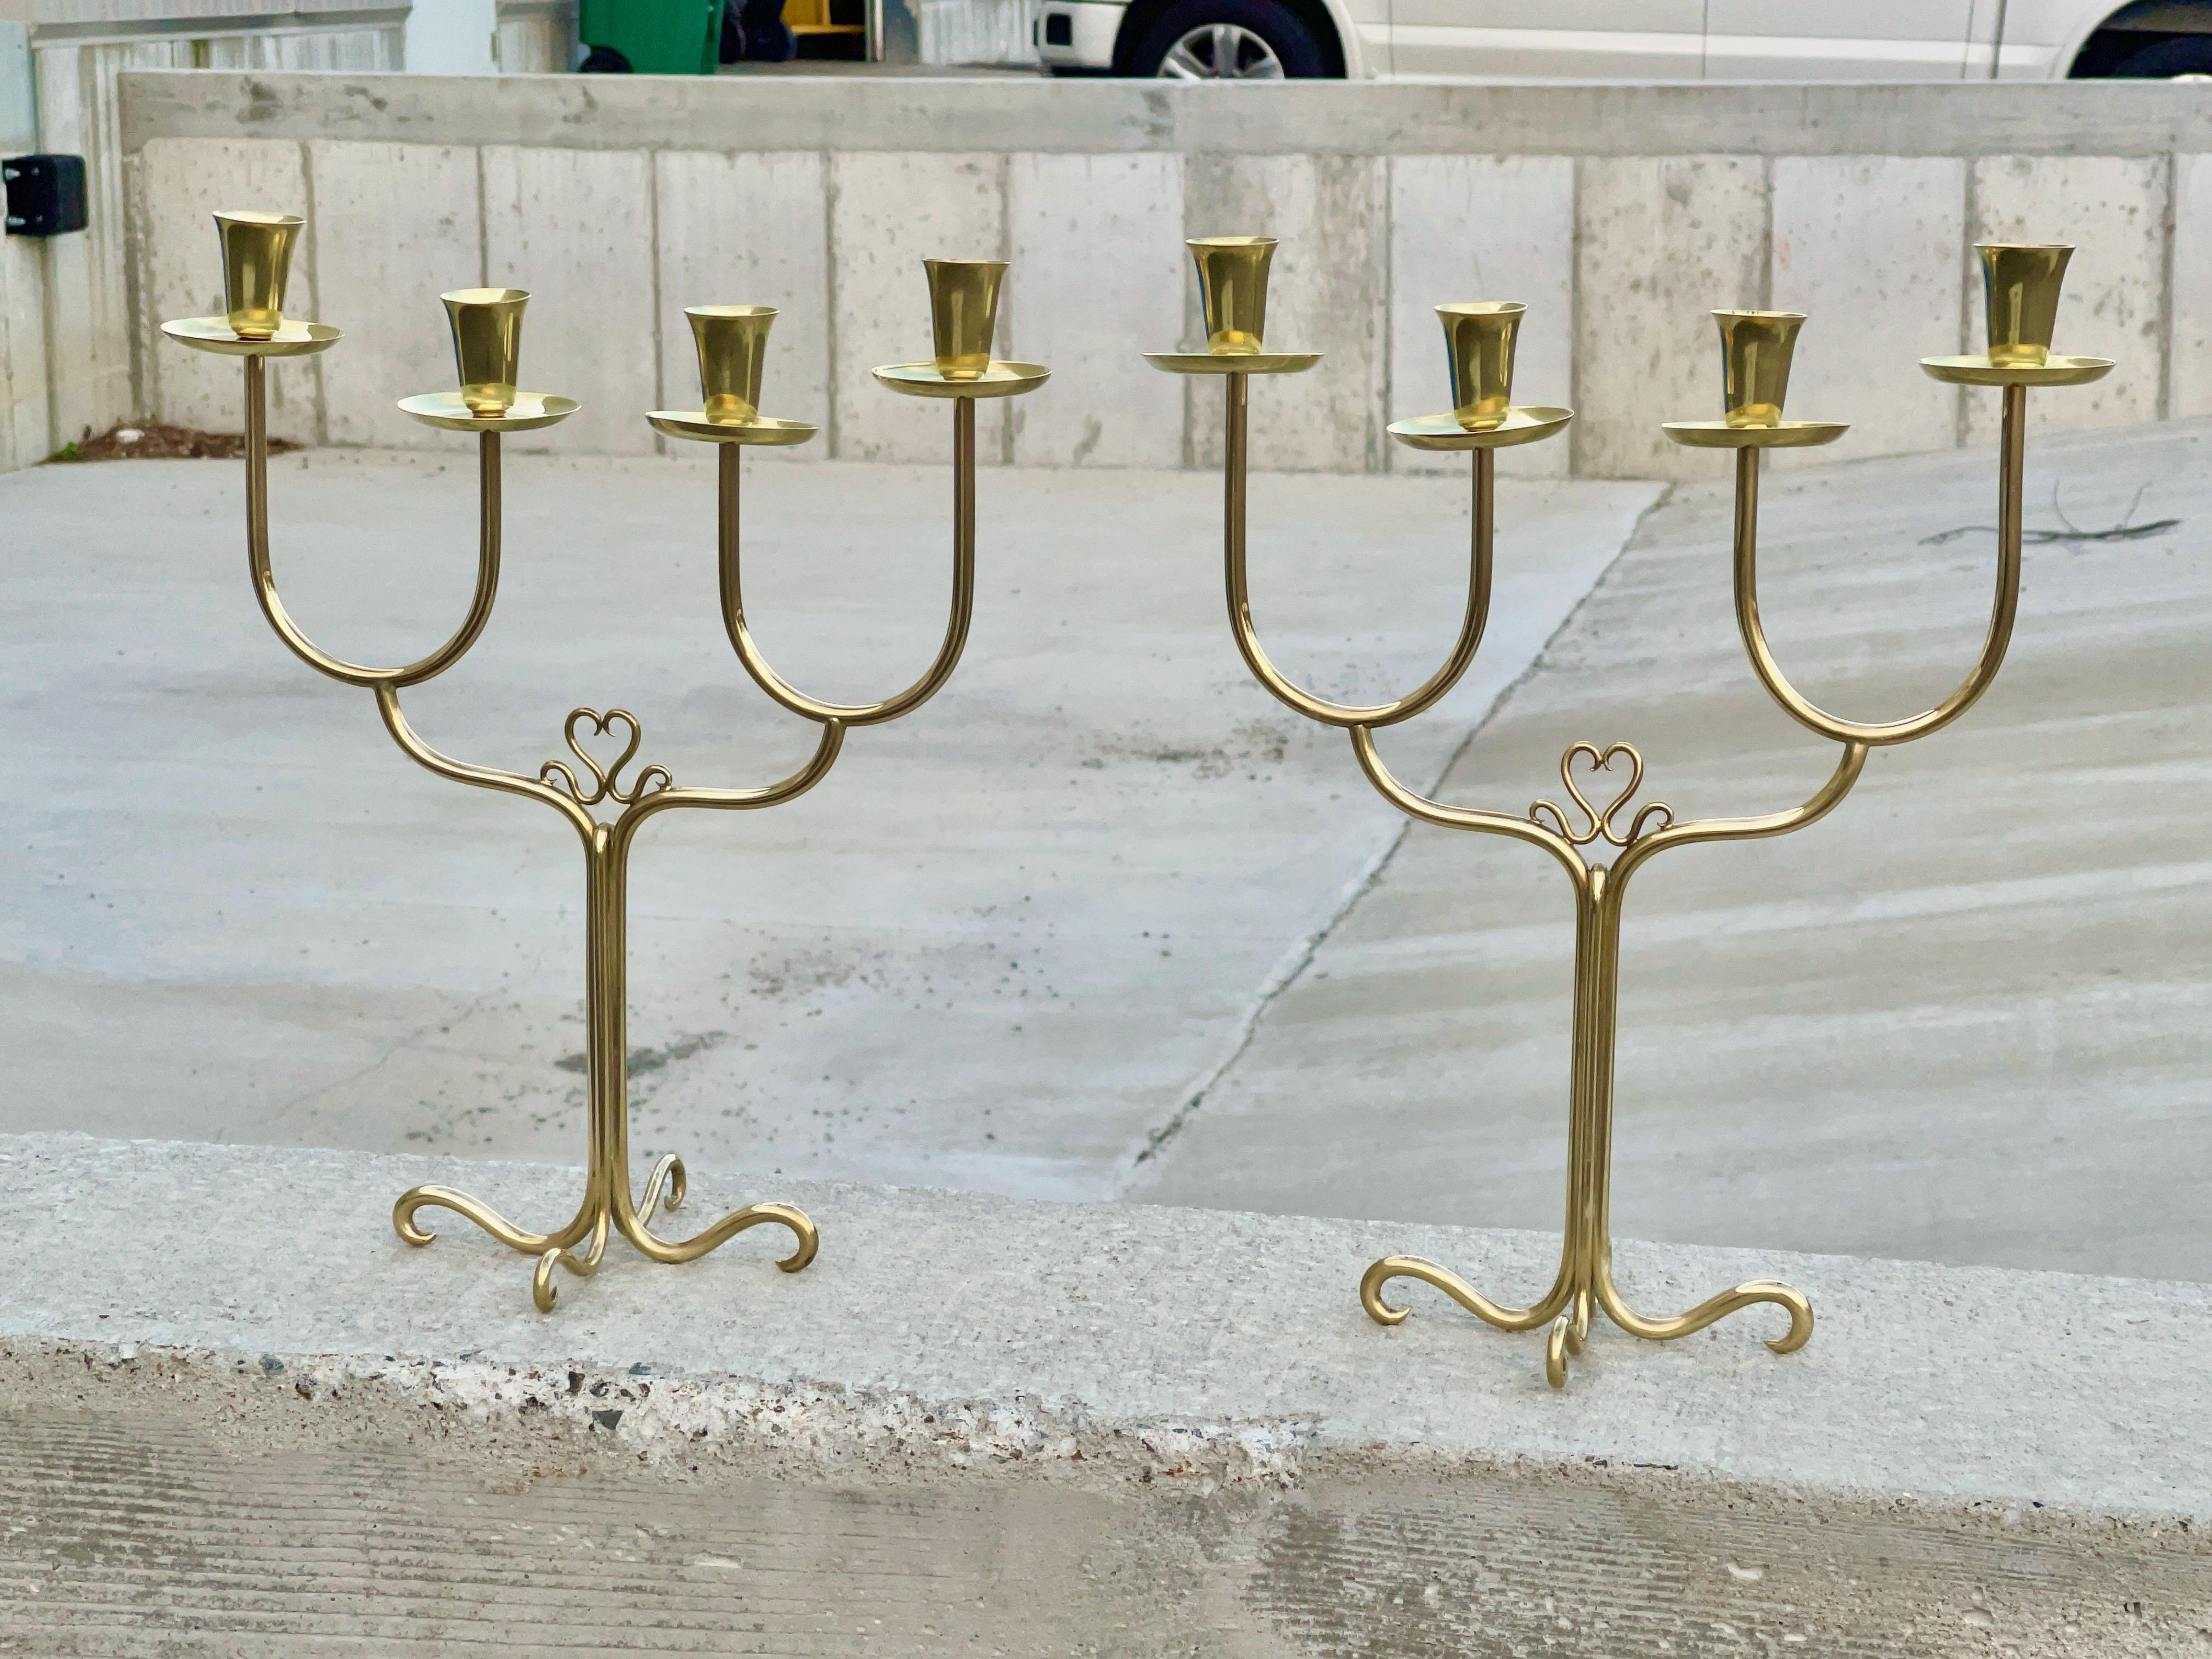 Pair of solid brass Italian 1950's candelabra by architect-designer, Cesare Lacca.
Each holds four candle tapers.
Look closely at the phenomenally skillful brass work using solid brass rod.  The ends look almost like pulled taffy!
Each cup unscrews